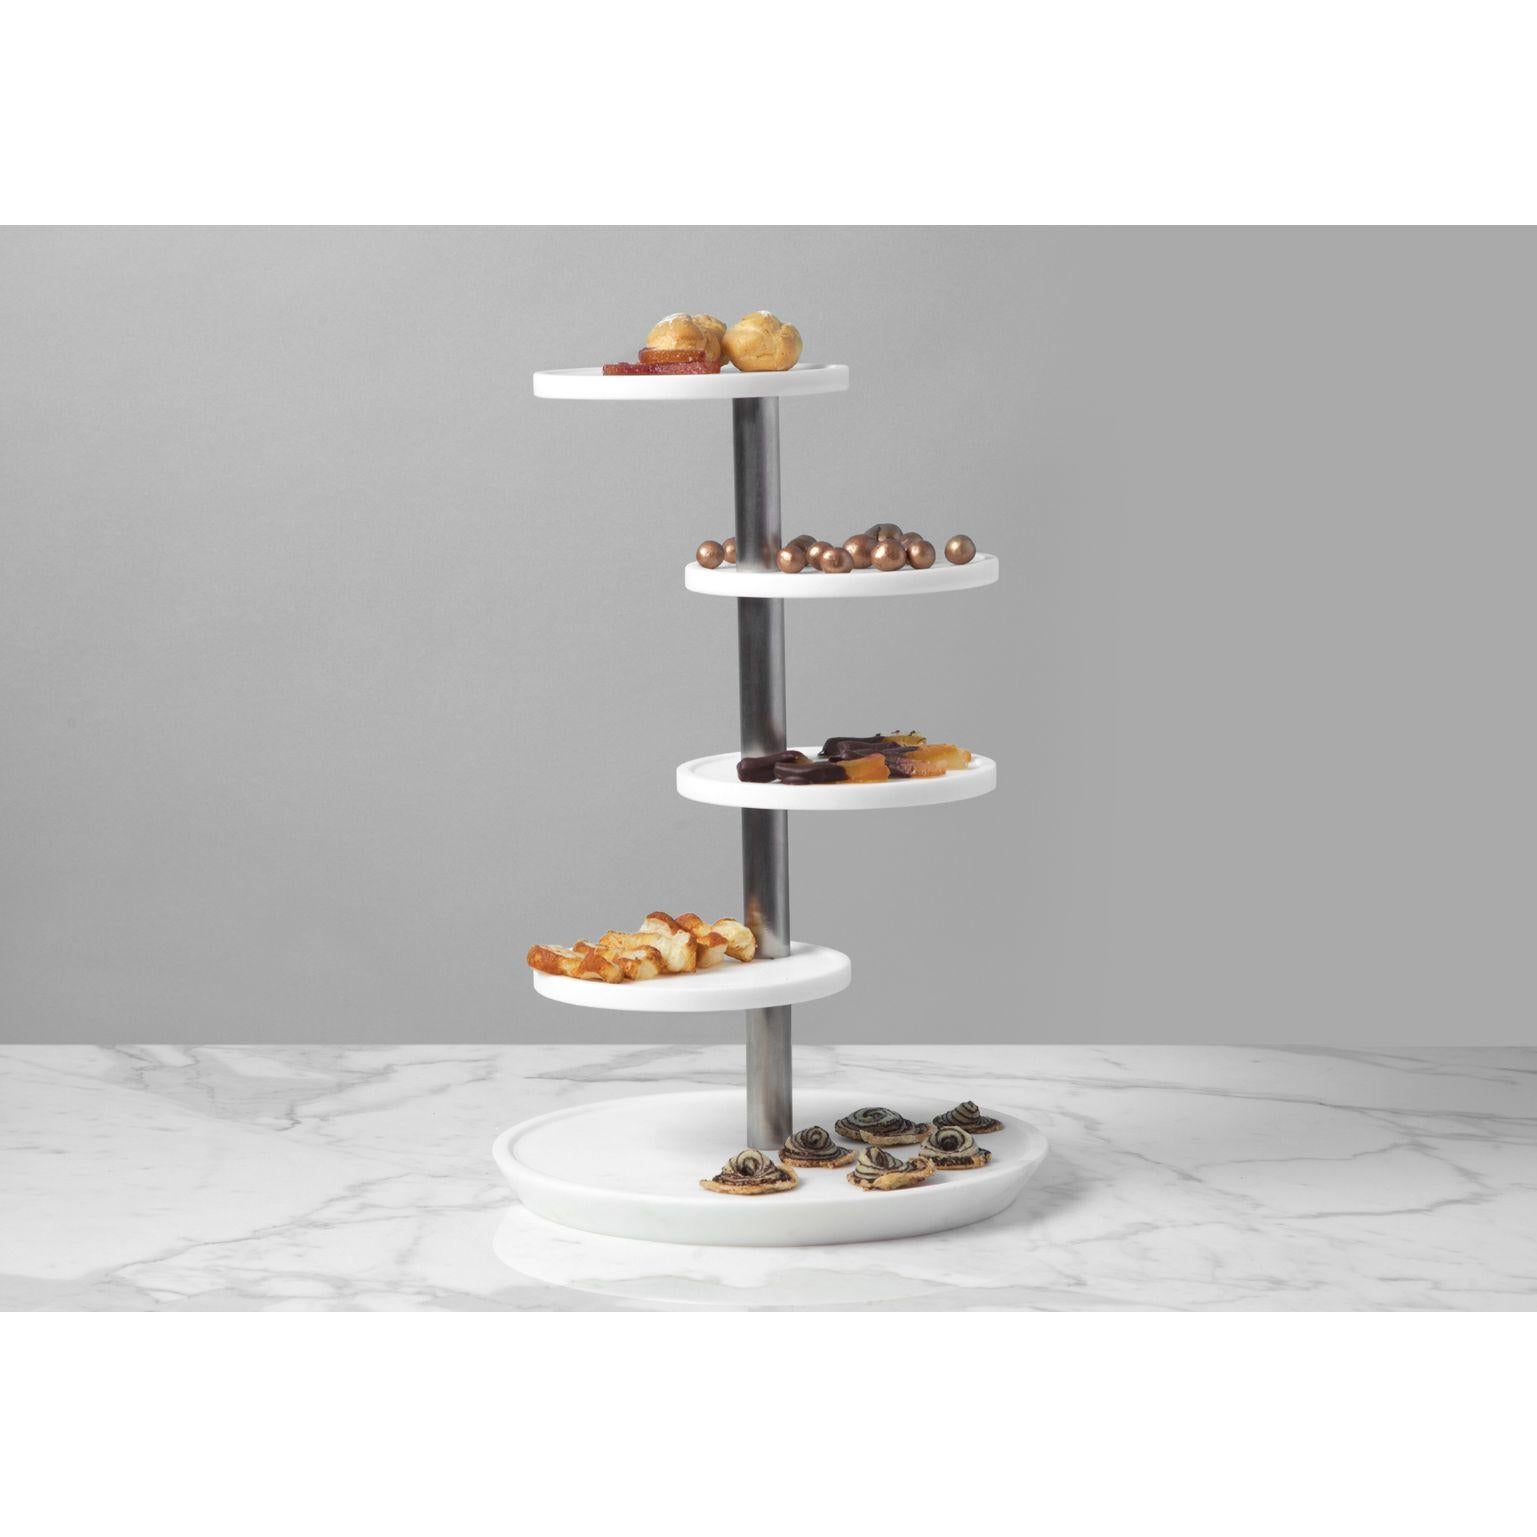 Pre appetizers/ desserts multilevel tray by Cristoforo Trapani
Magnolia Table Collection
Dimensions: 30 x 44 cm
Materials: Bianco michelangelo, steel

Contemporary chefs love to construct their culinary creations to enhance their impact; it’s